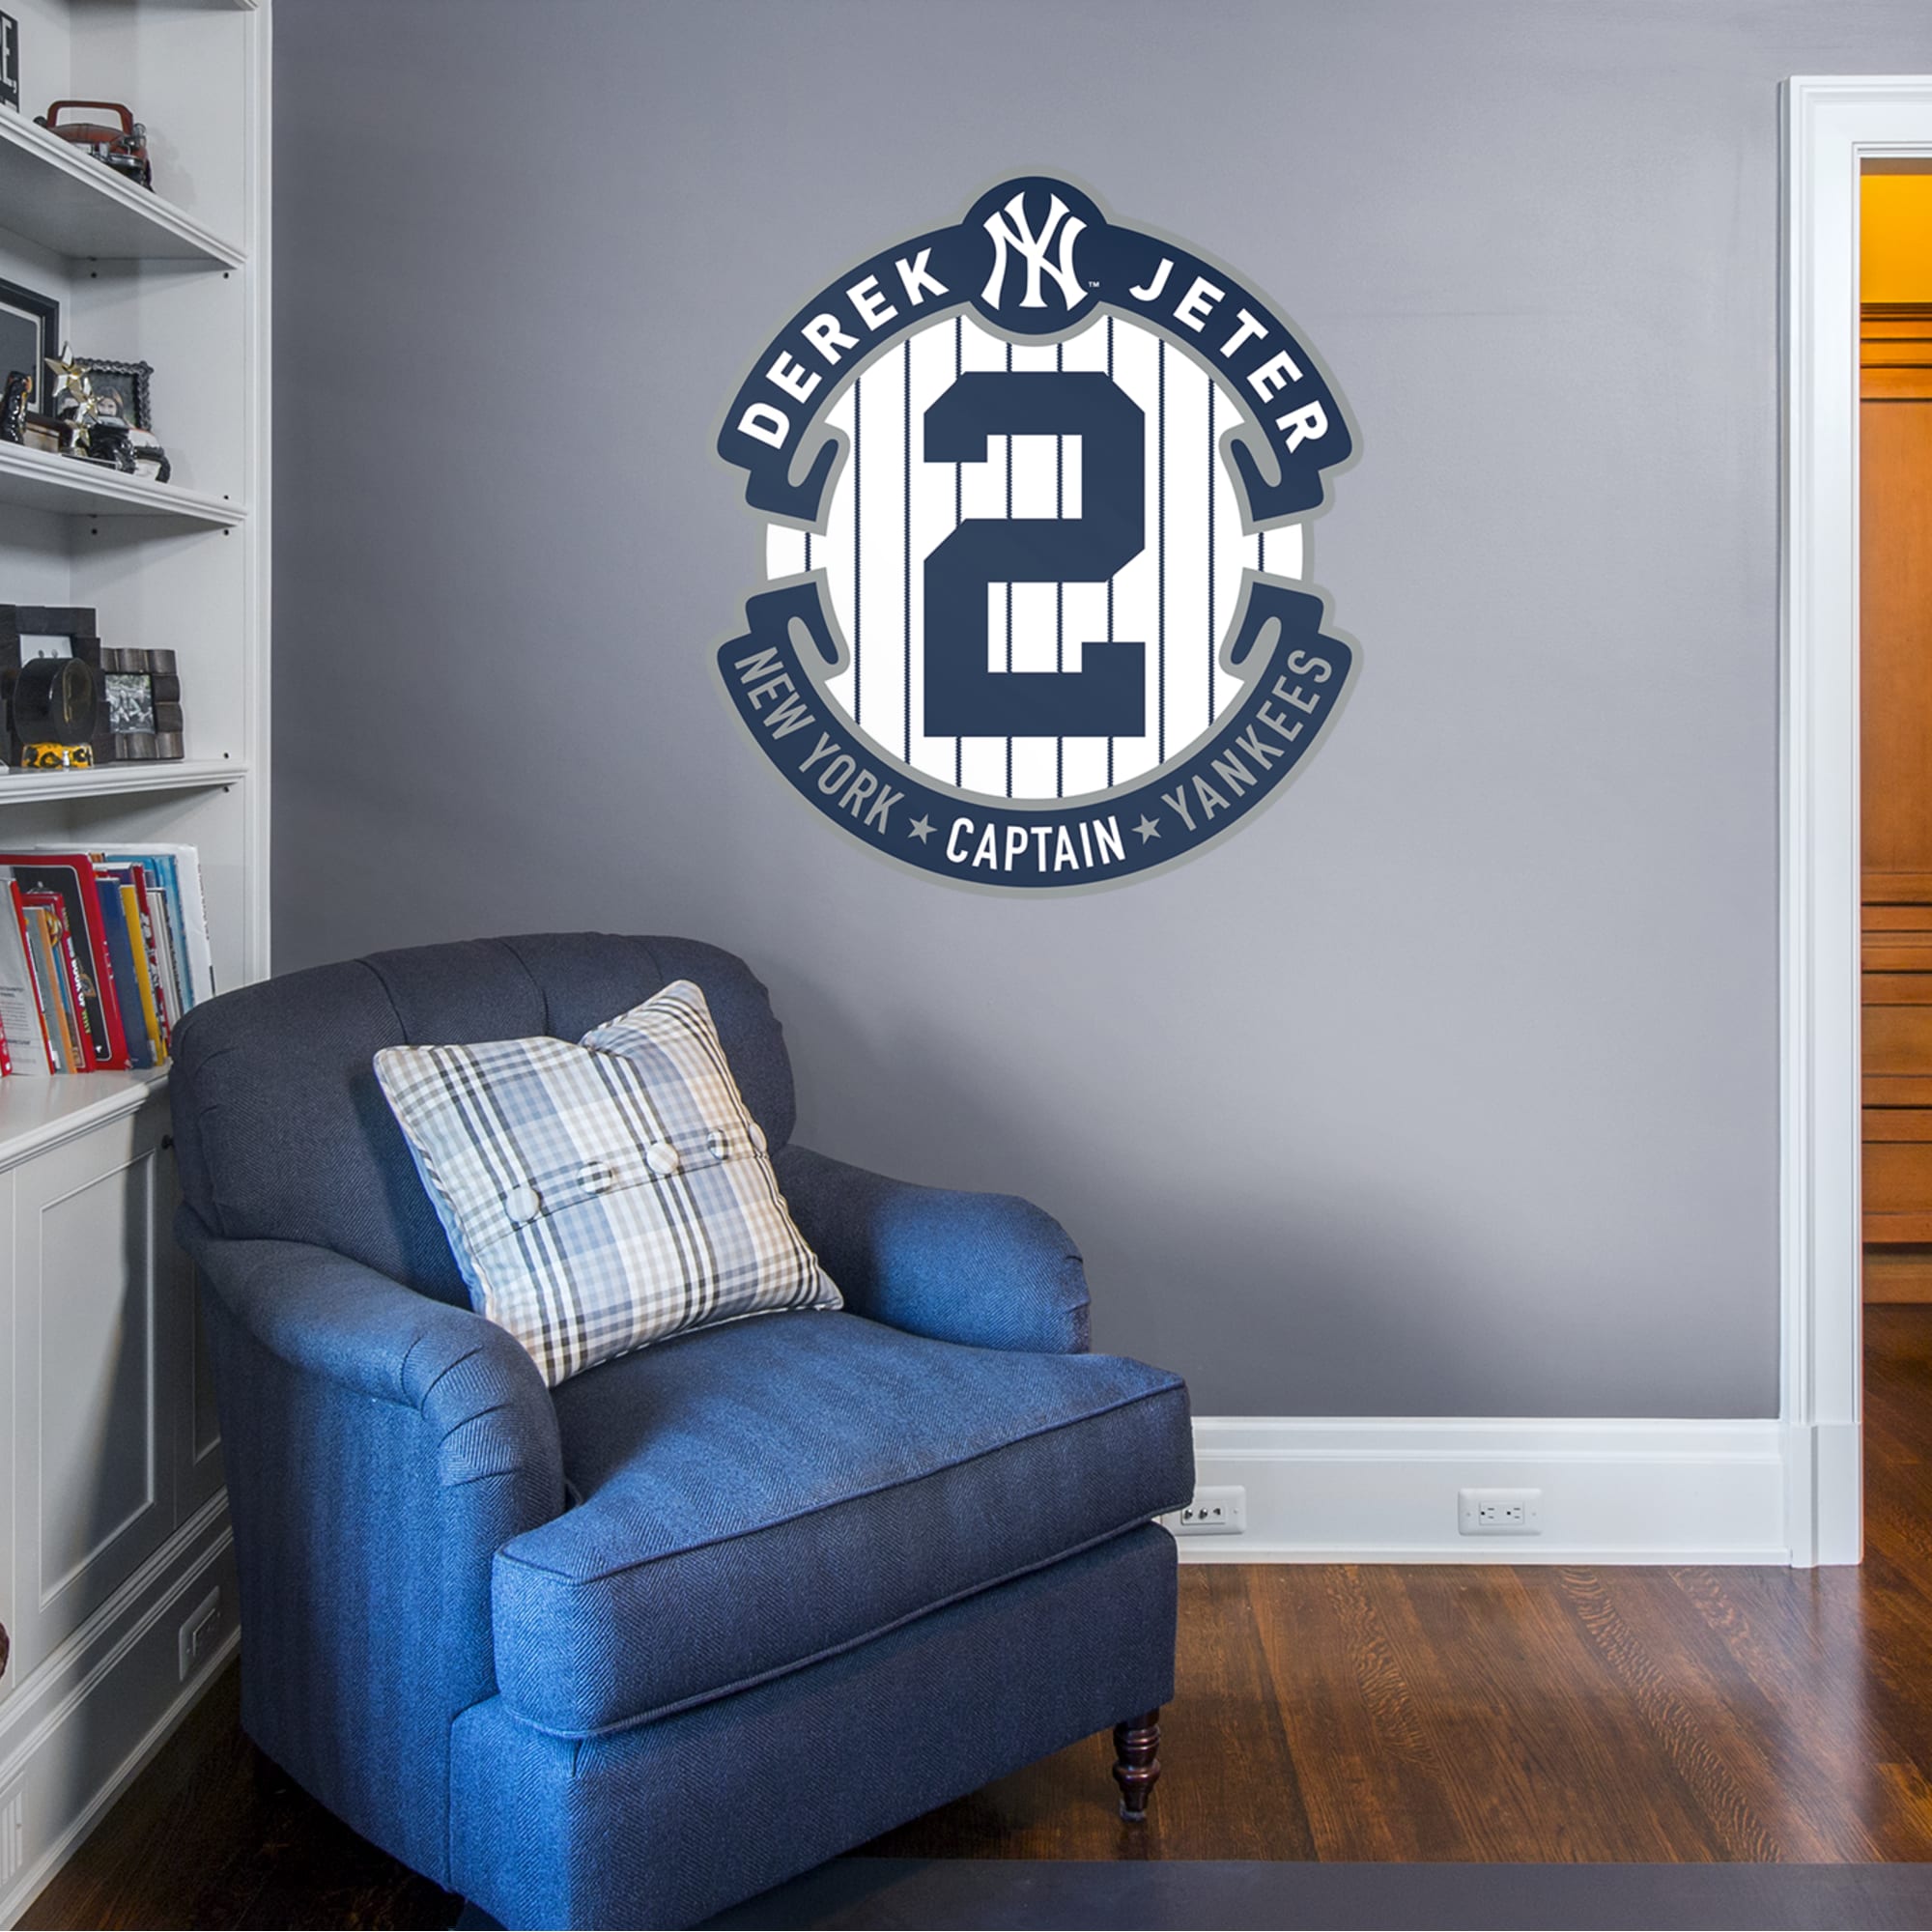 Derek Jeter for New York Yankees: Logo - Officially Licensed MLB Removable Wall Decal Giant Logo (38"W x 43"H) by Fathead | Viny